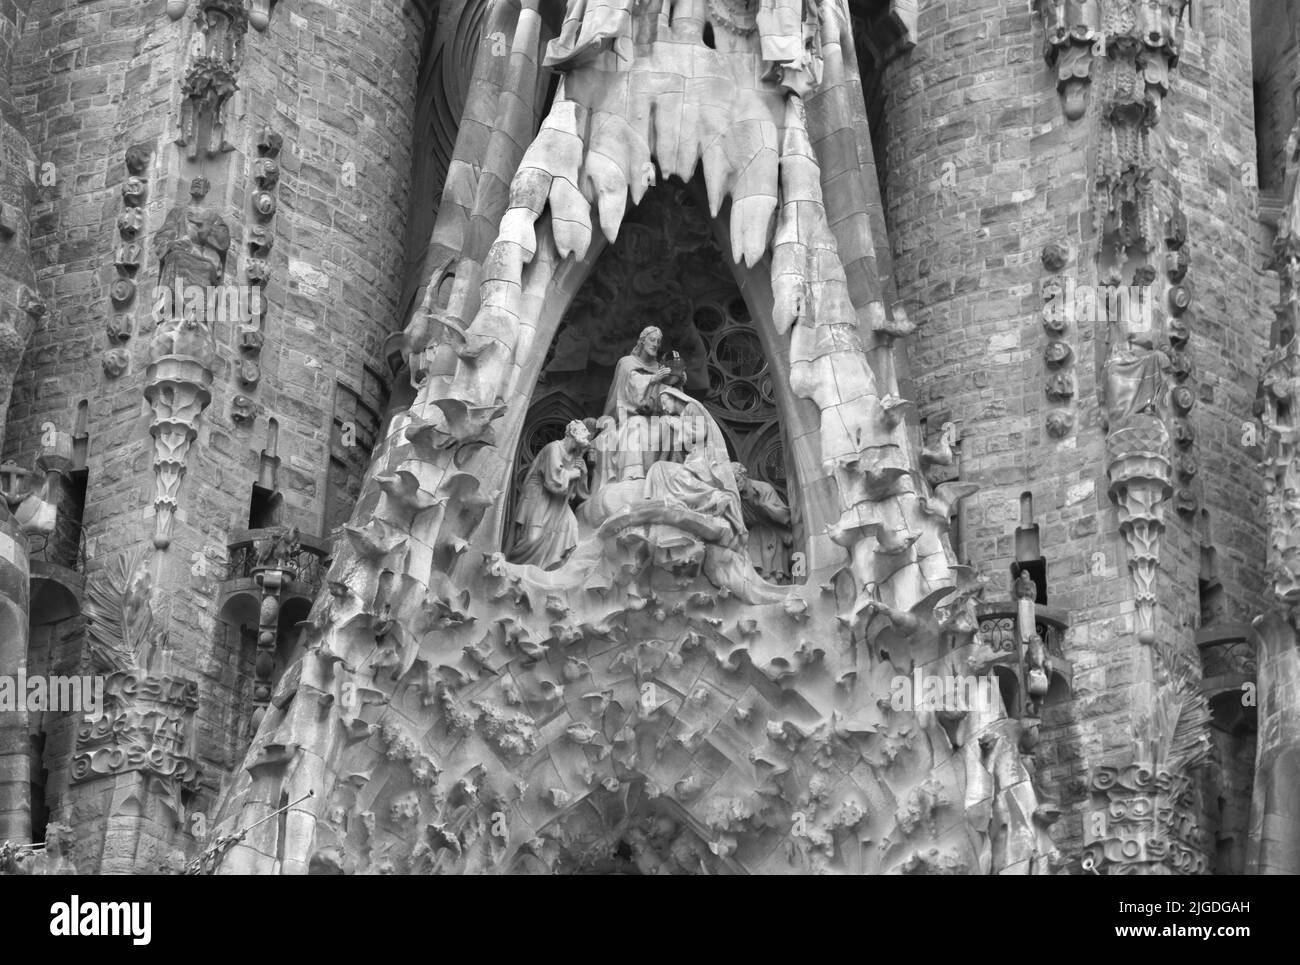 Black and White detail of the famous Sagrada Família church in Barcelona. The church was designed by the famous architect Antoni Gaudi and is still un Stock Photo